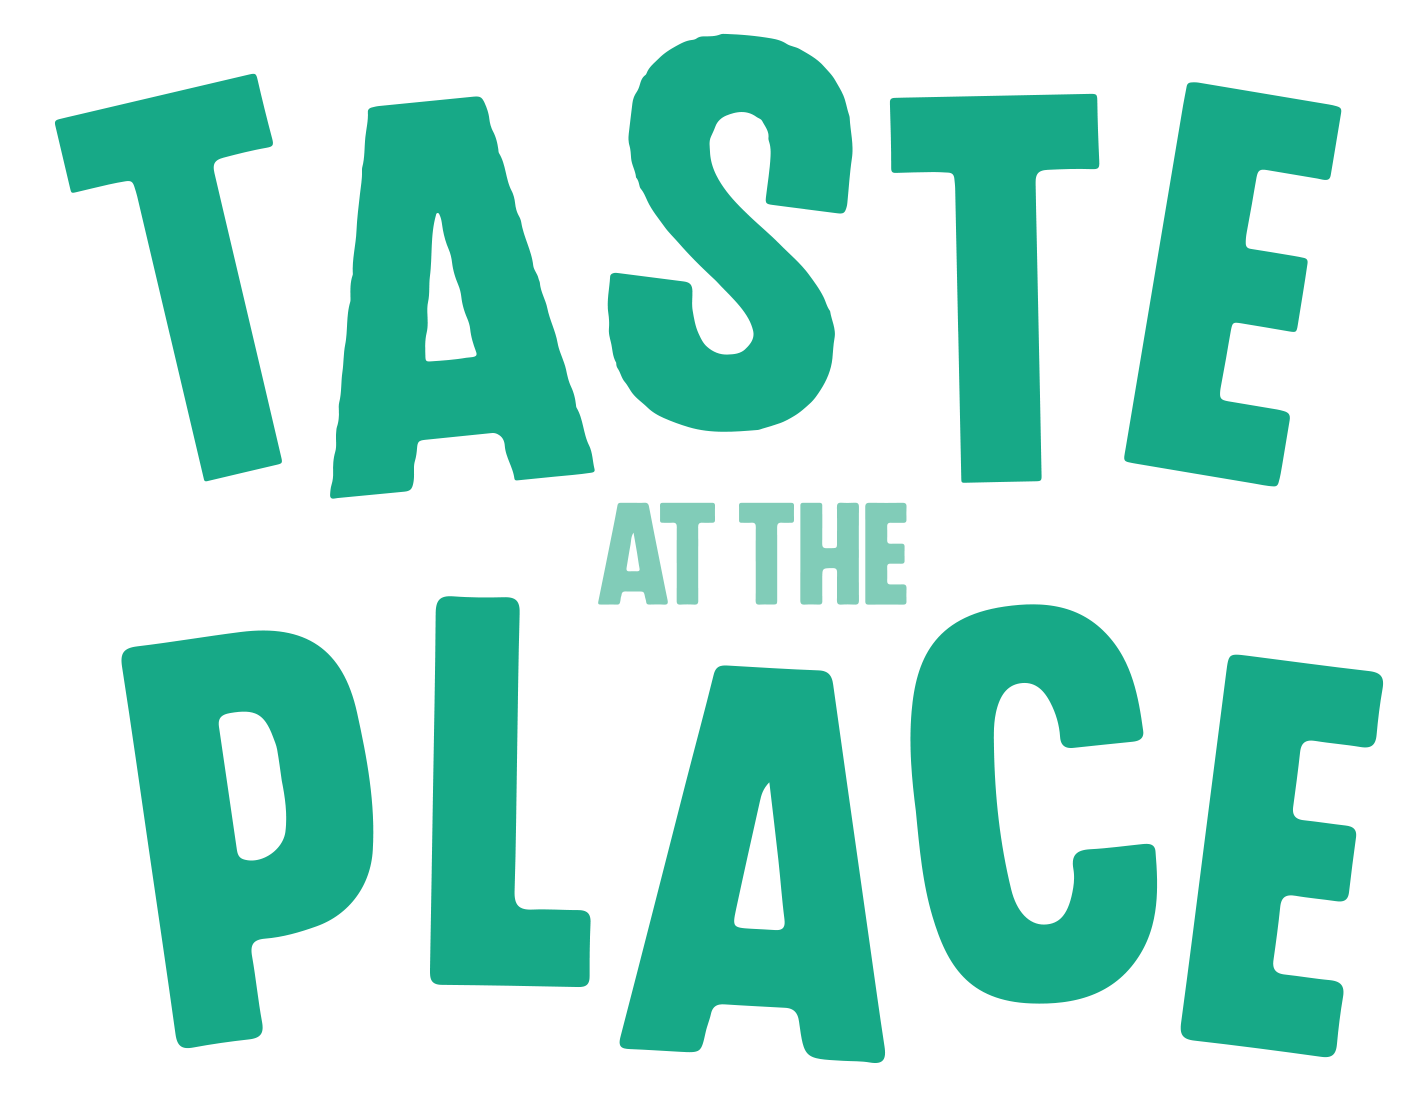 Taste at The Place